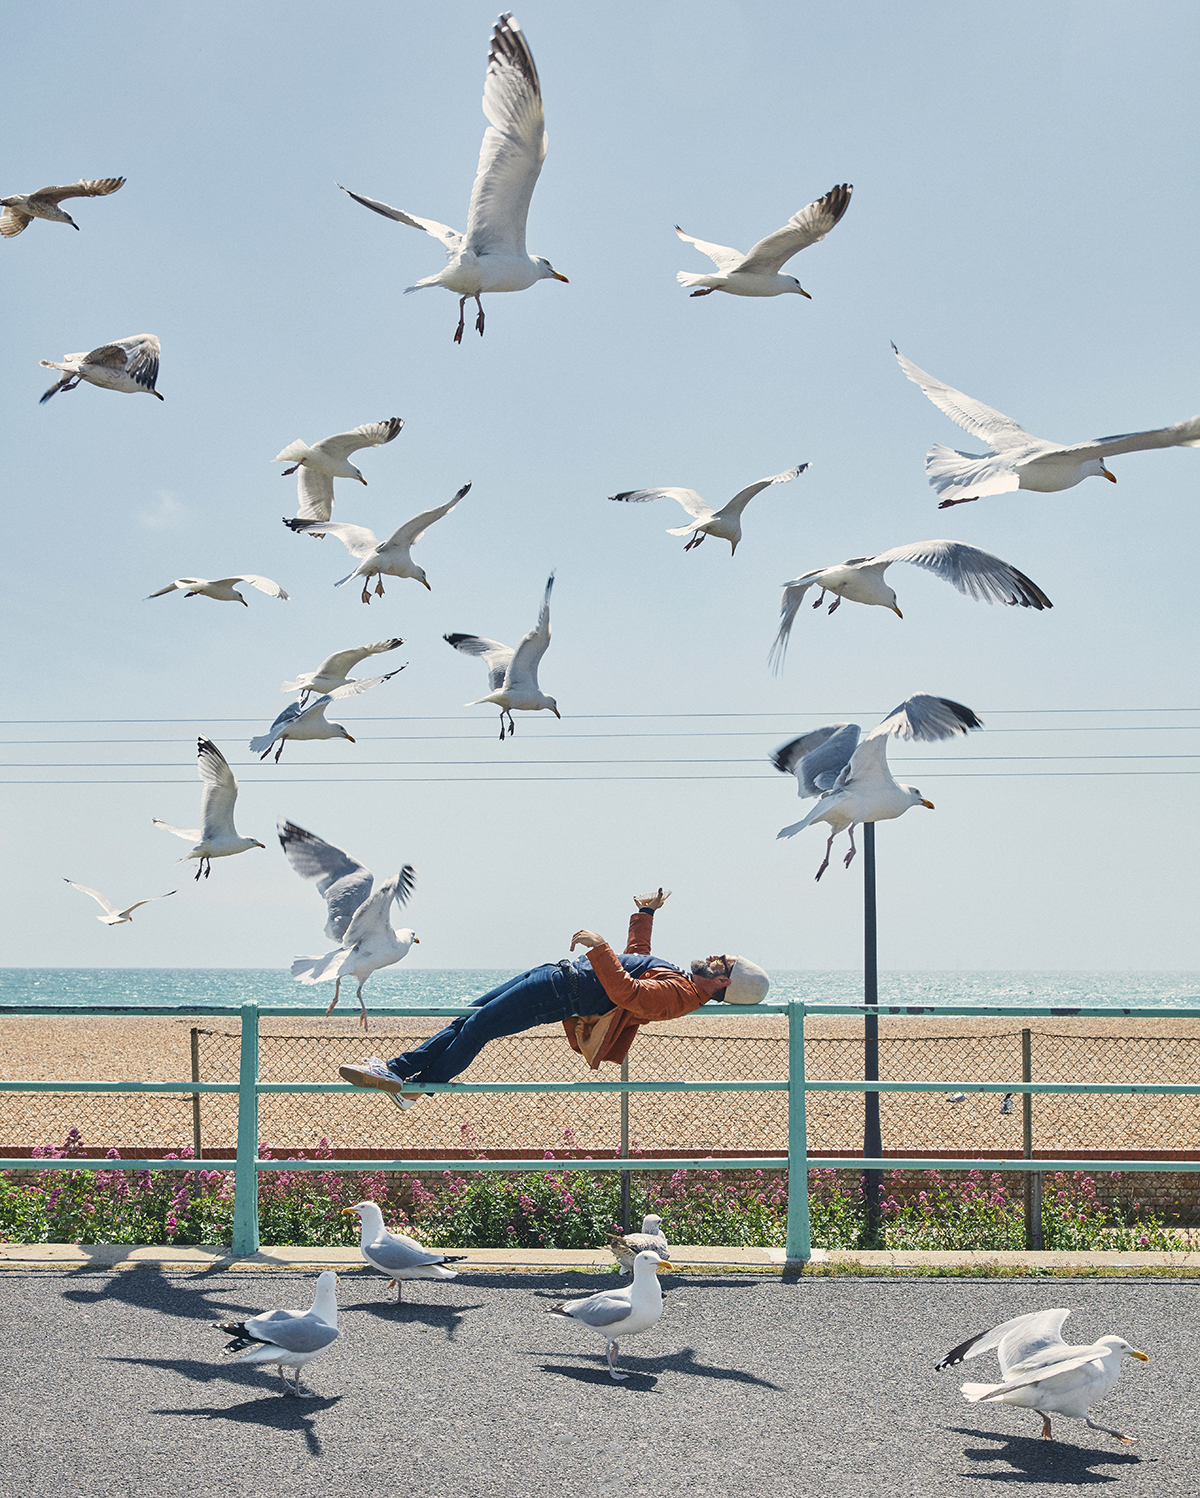 Man floating with seagulls